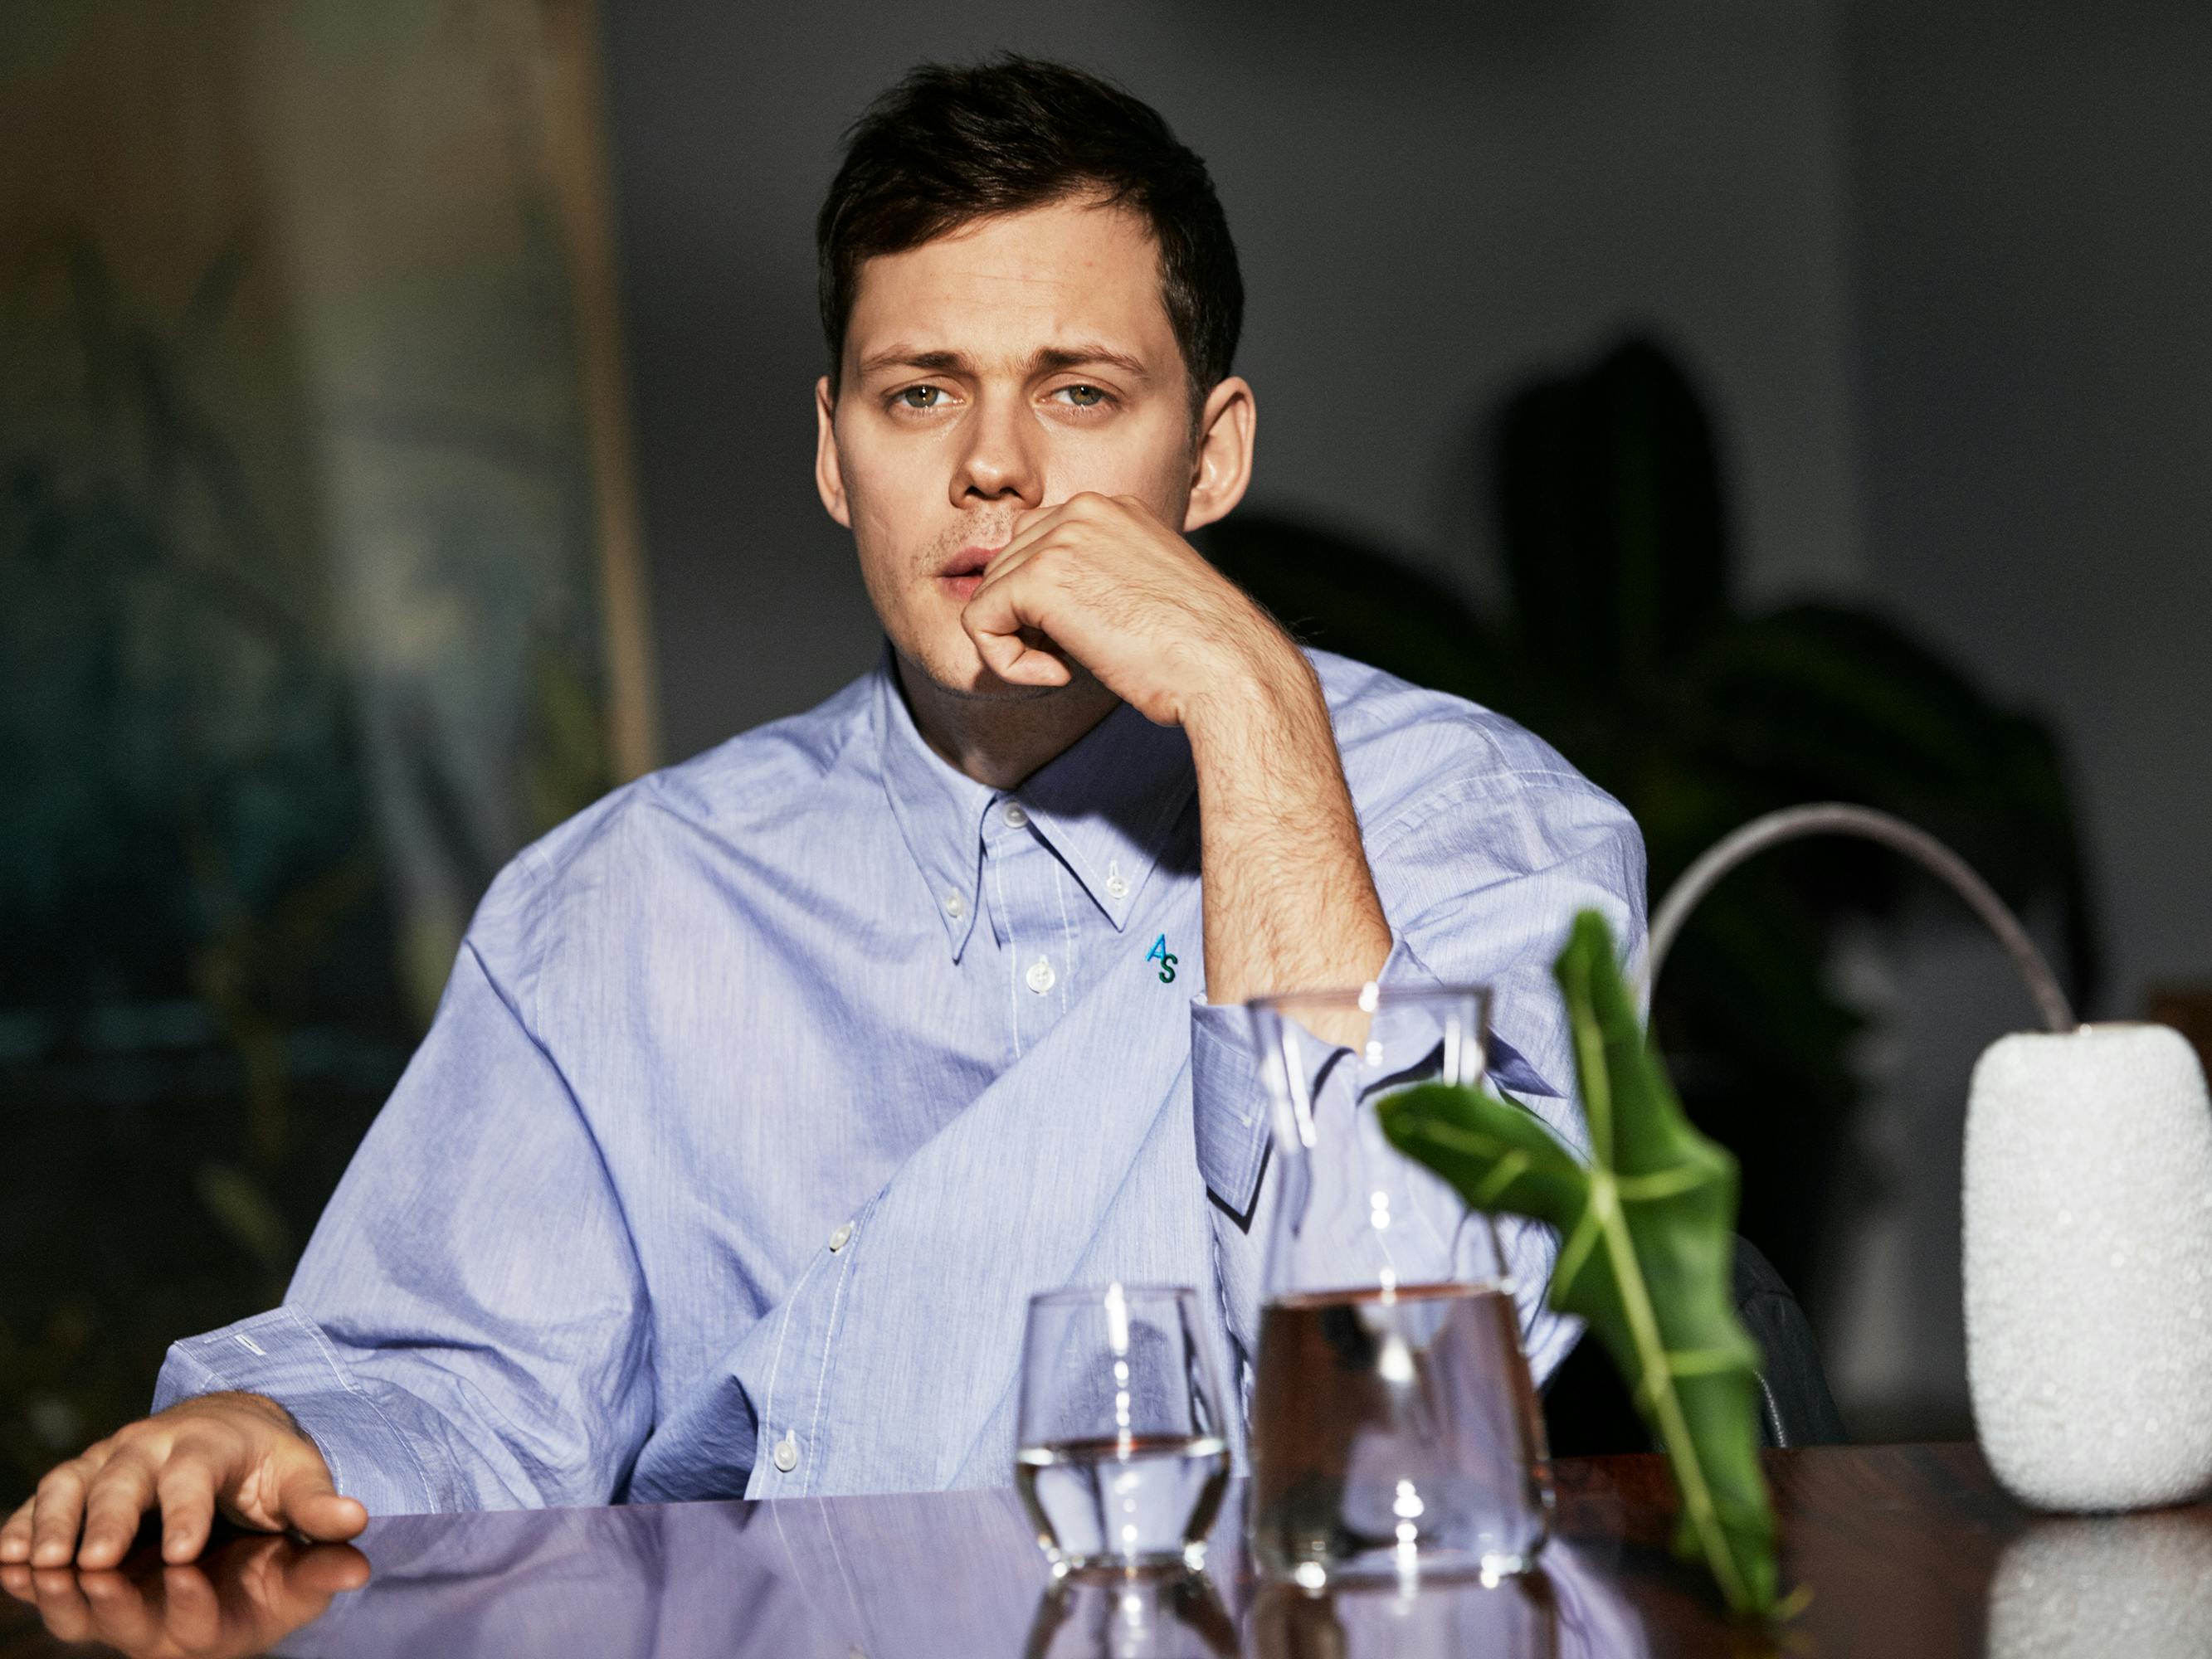 Bill Skarsgård wears a blue buttoned-down shirt and sits at a table strewn with glasses and a plant.